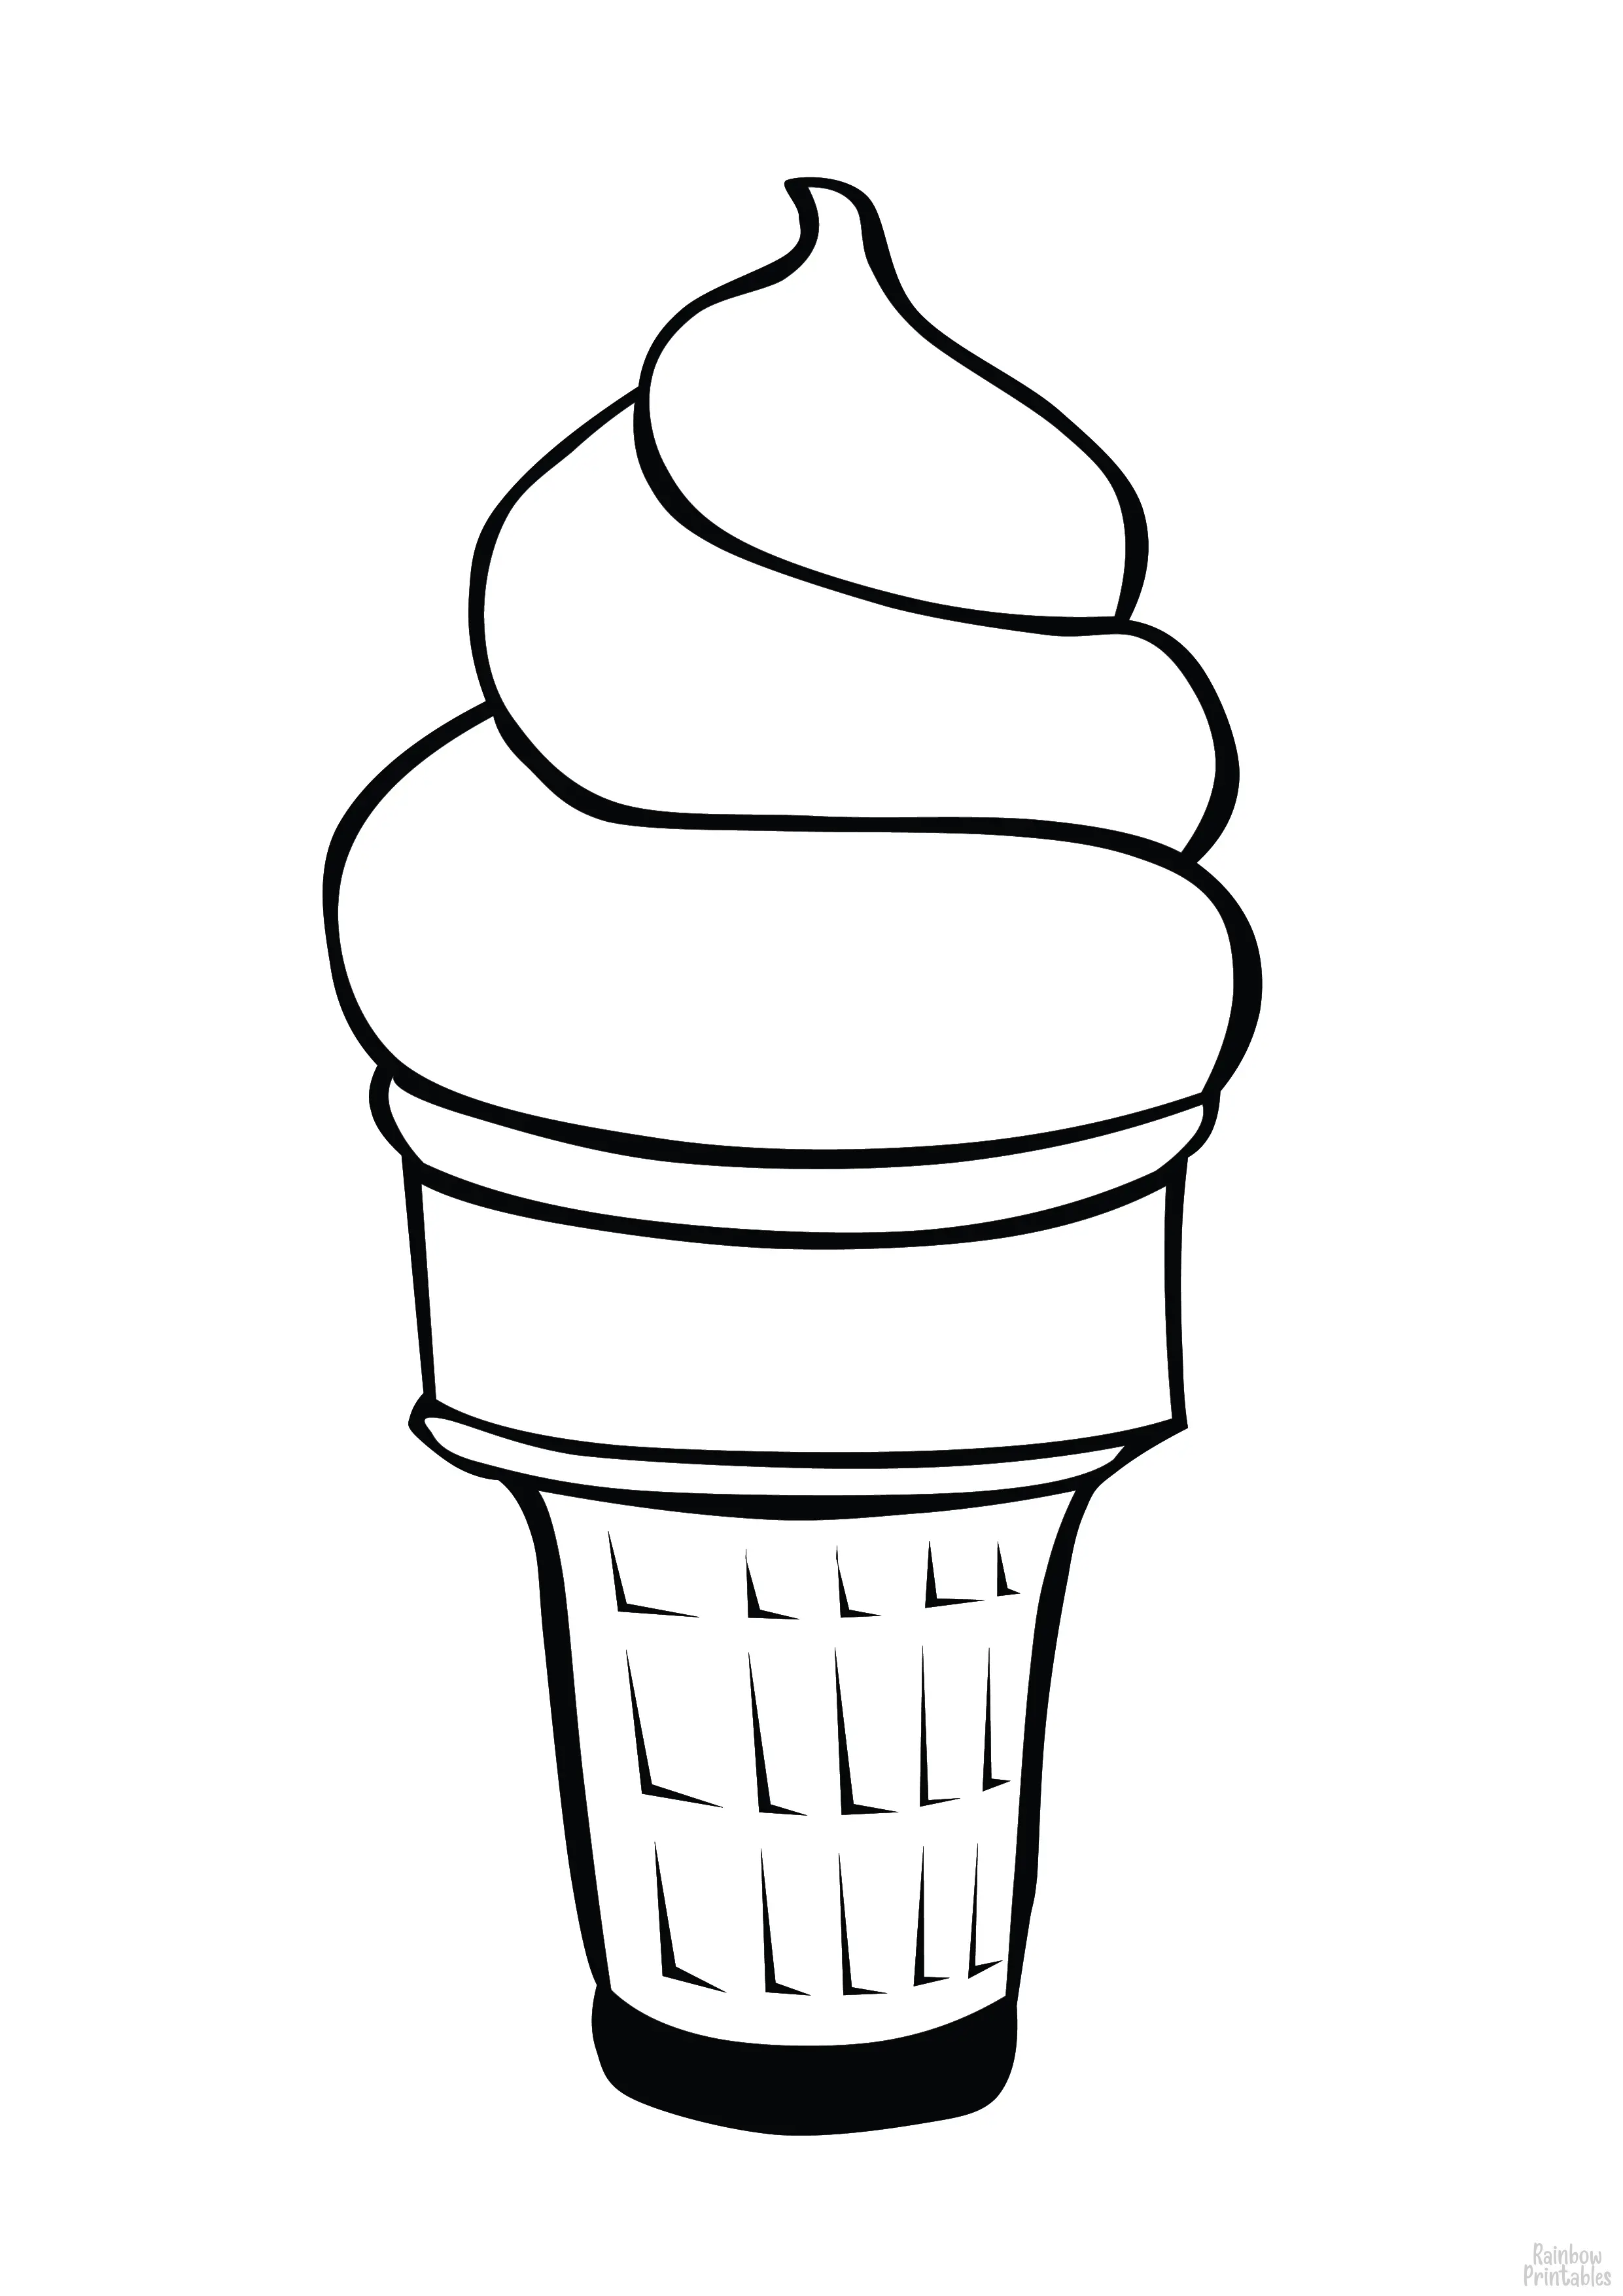 Ice Cream Cone Food Clipart Coloring Pages Line Art Drawings for Kids-01